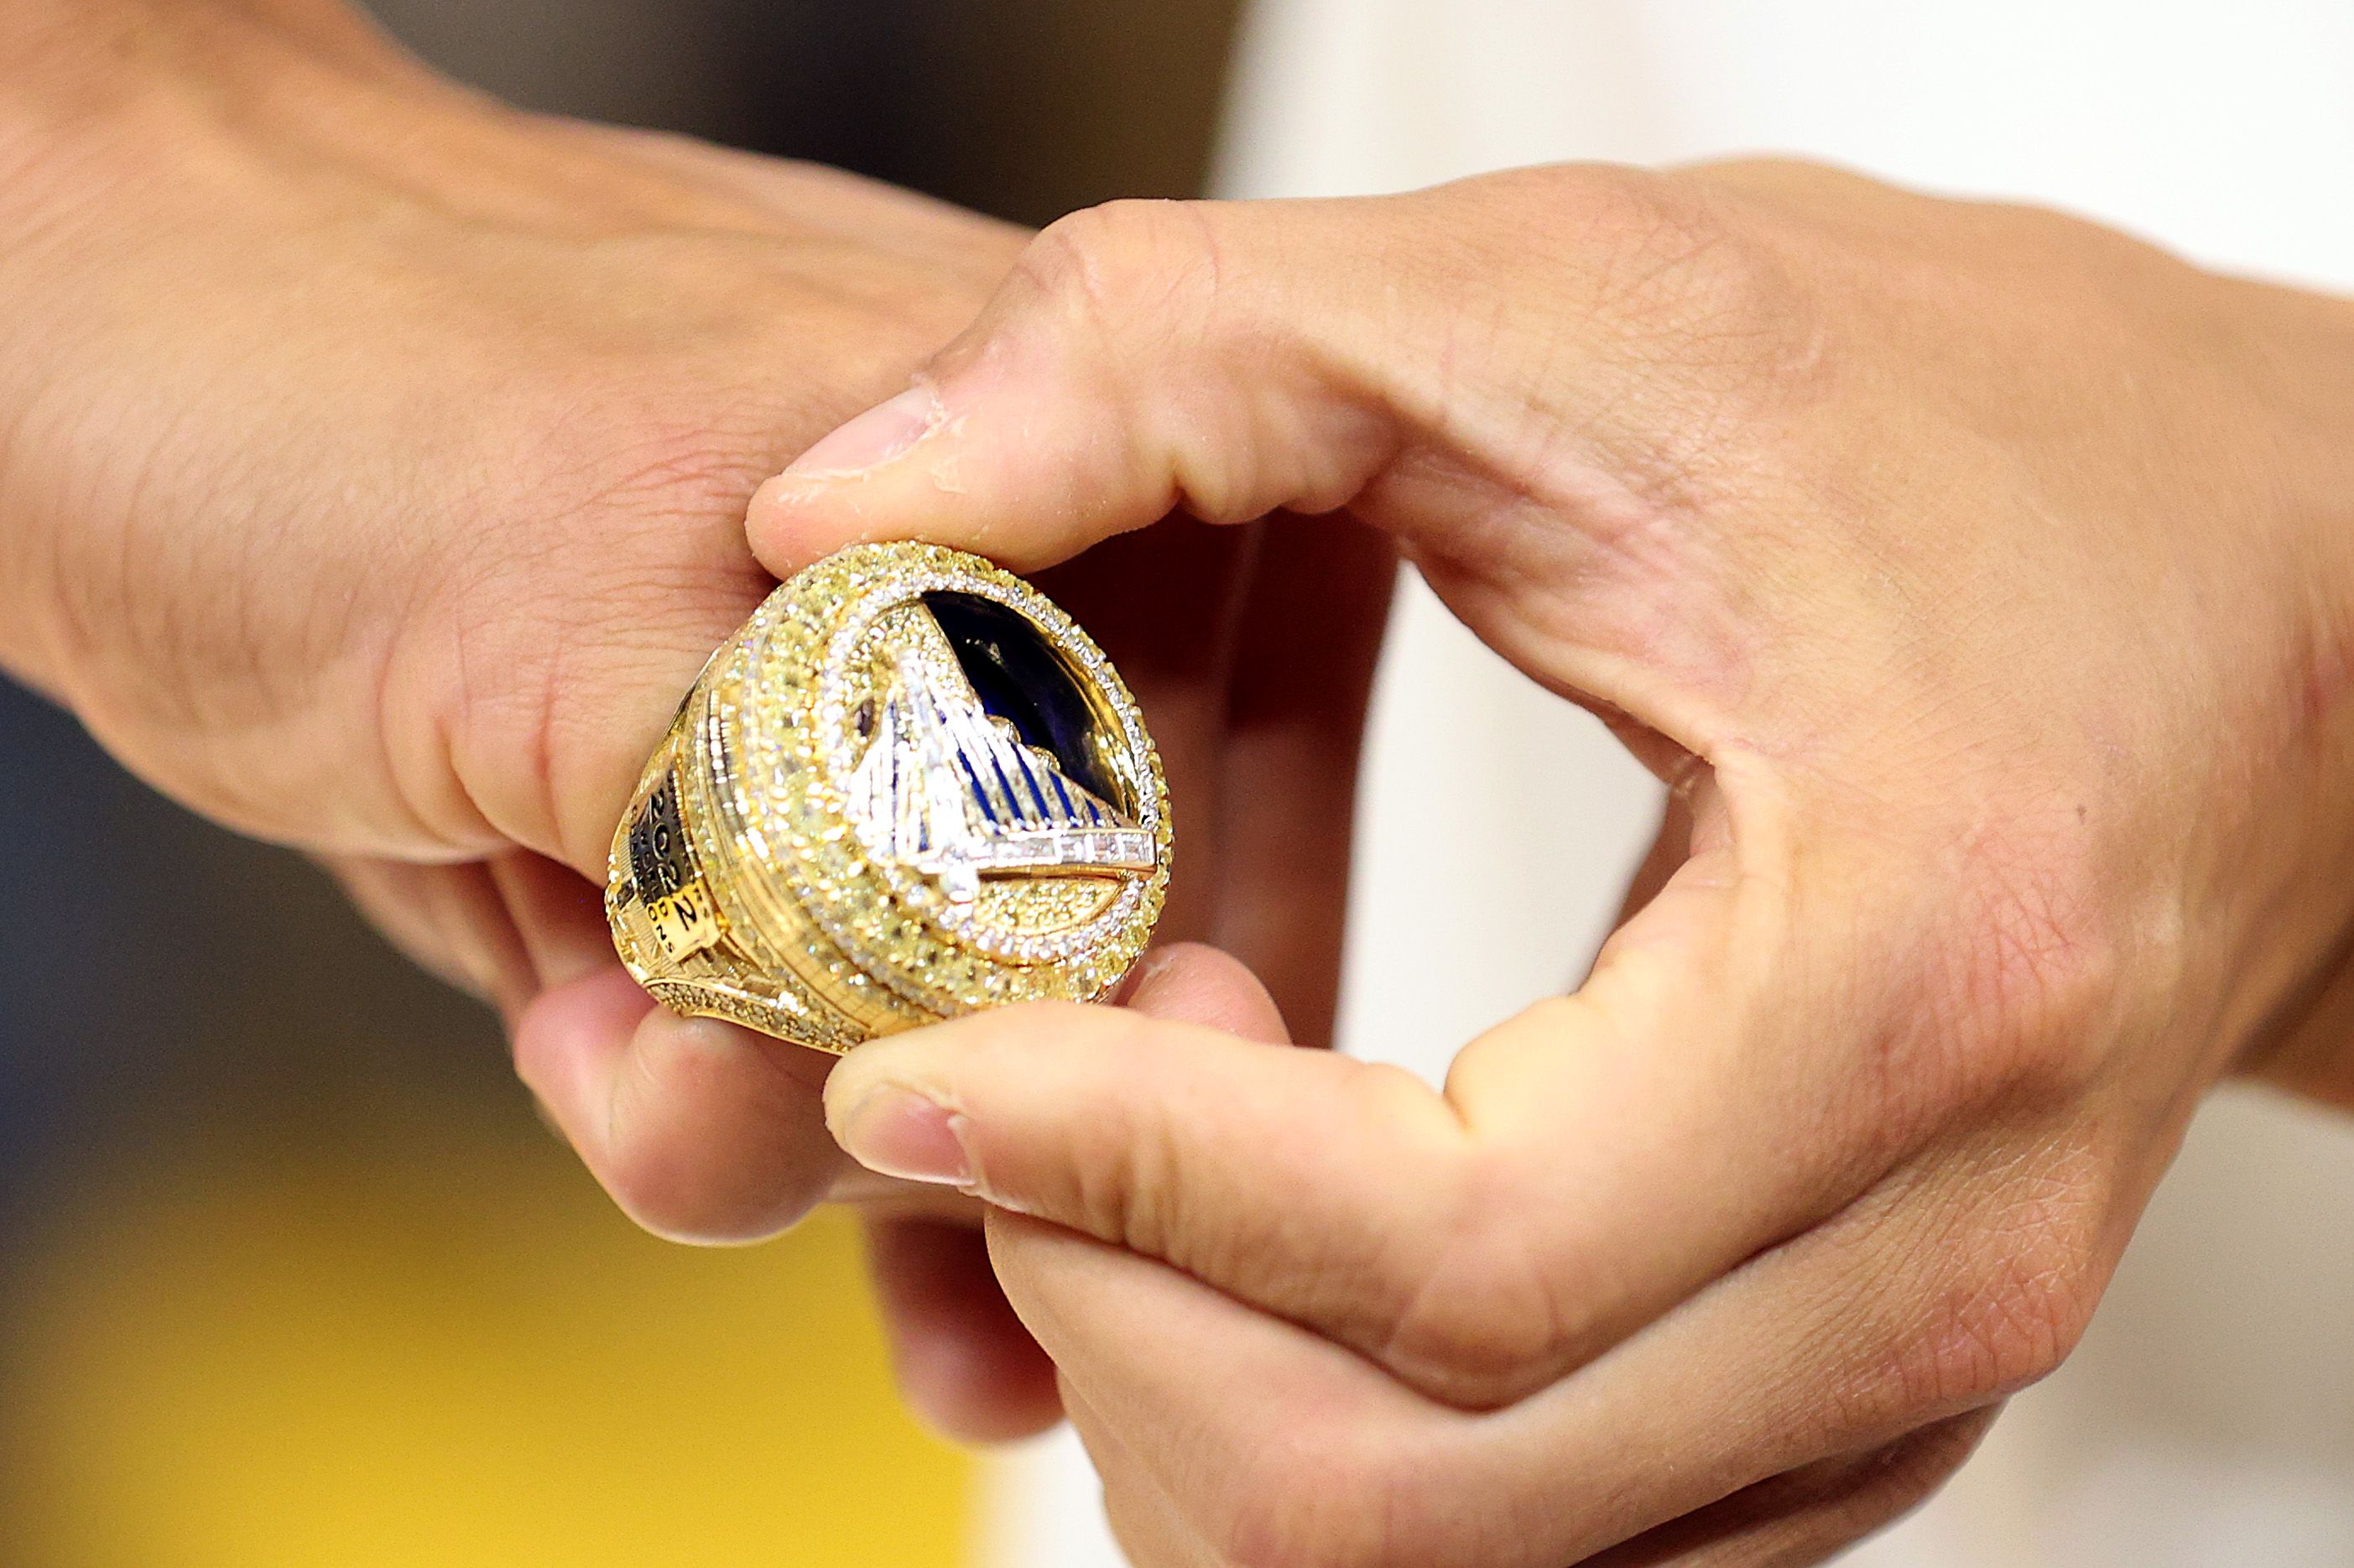 golden state ring ceremony 2022